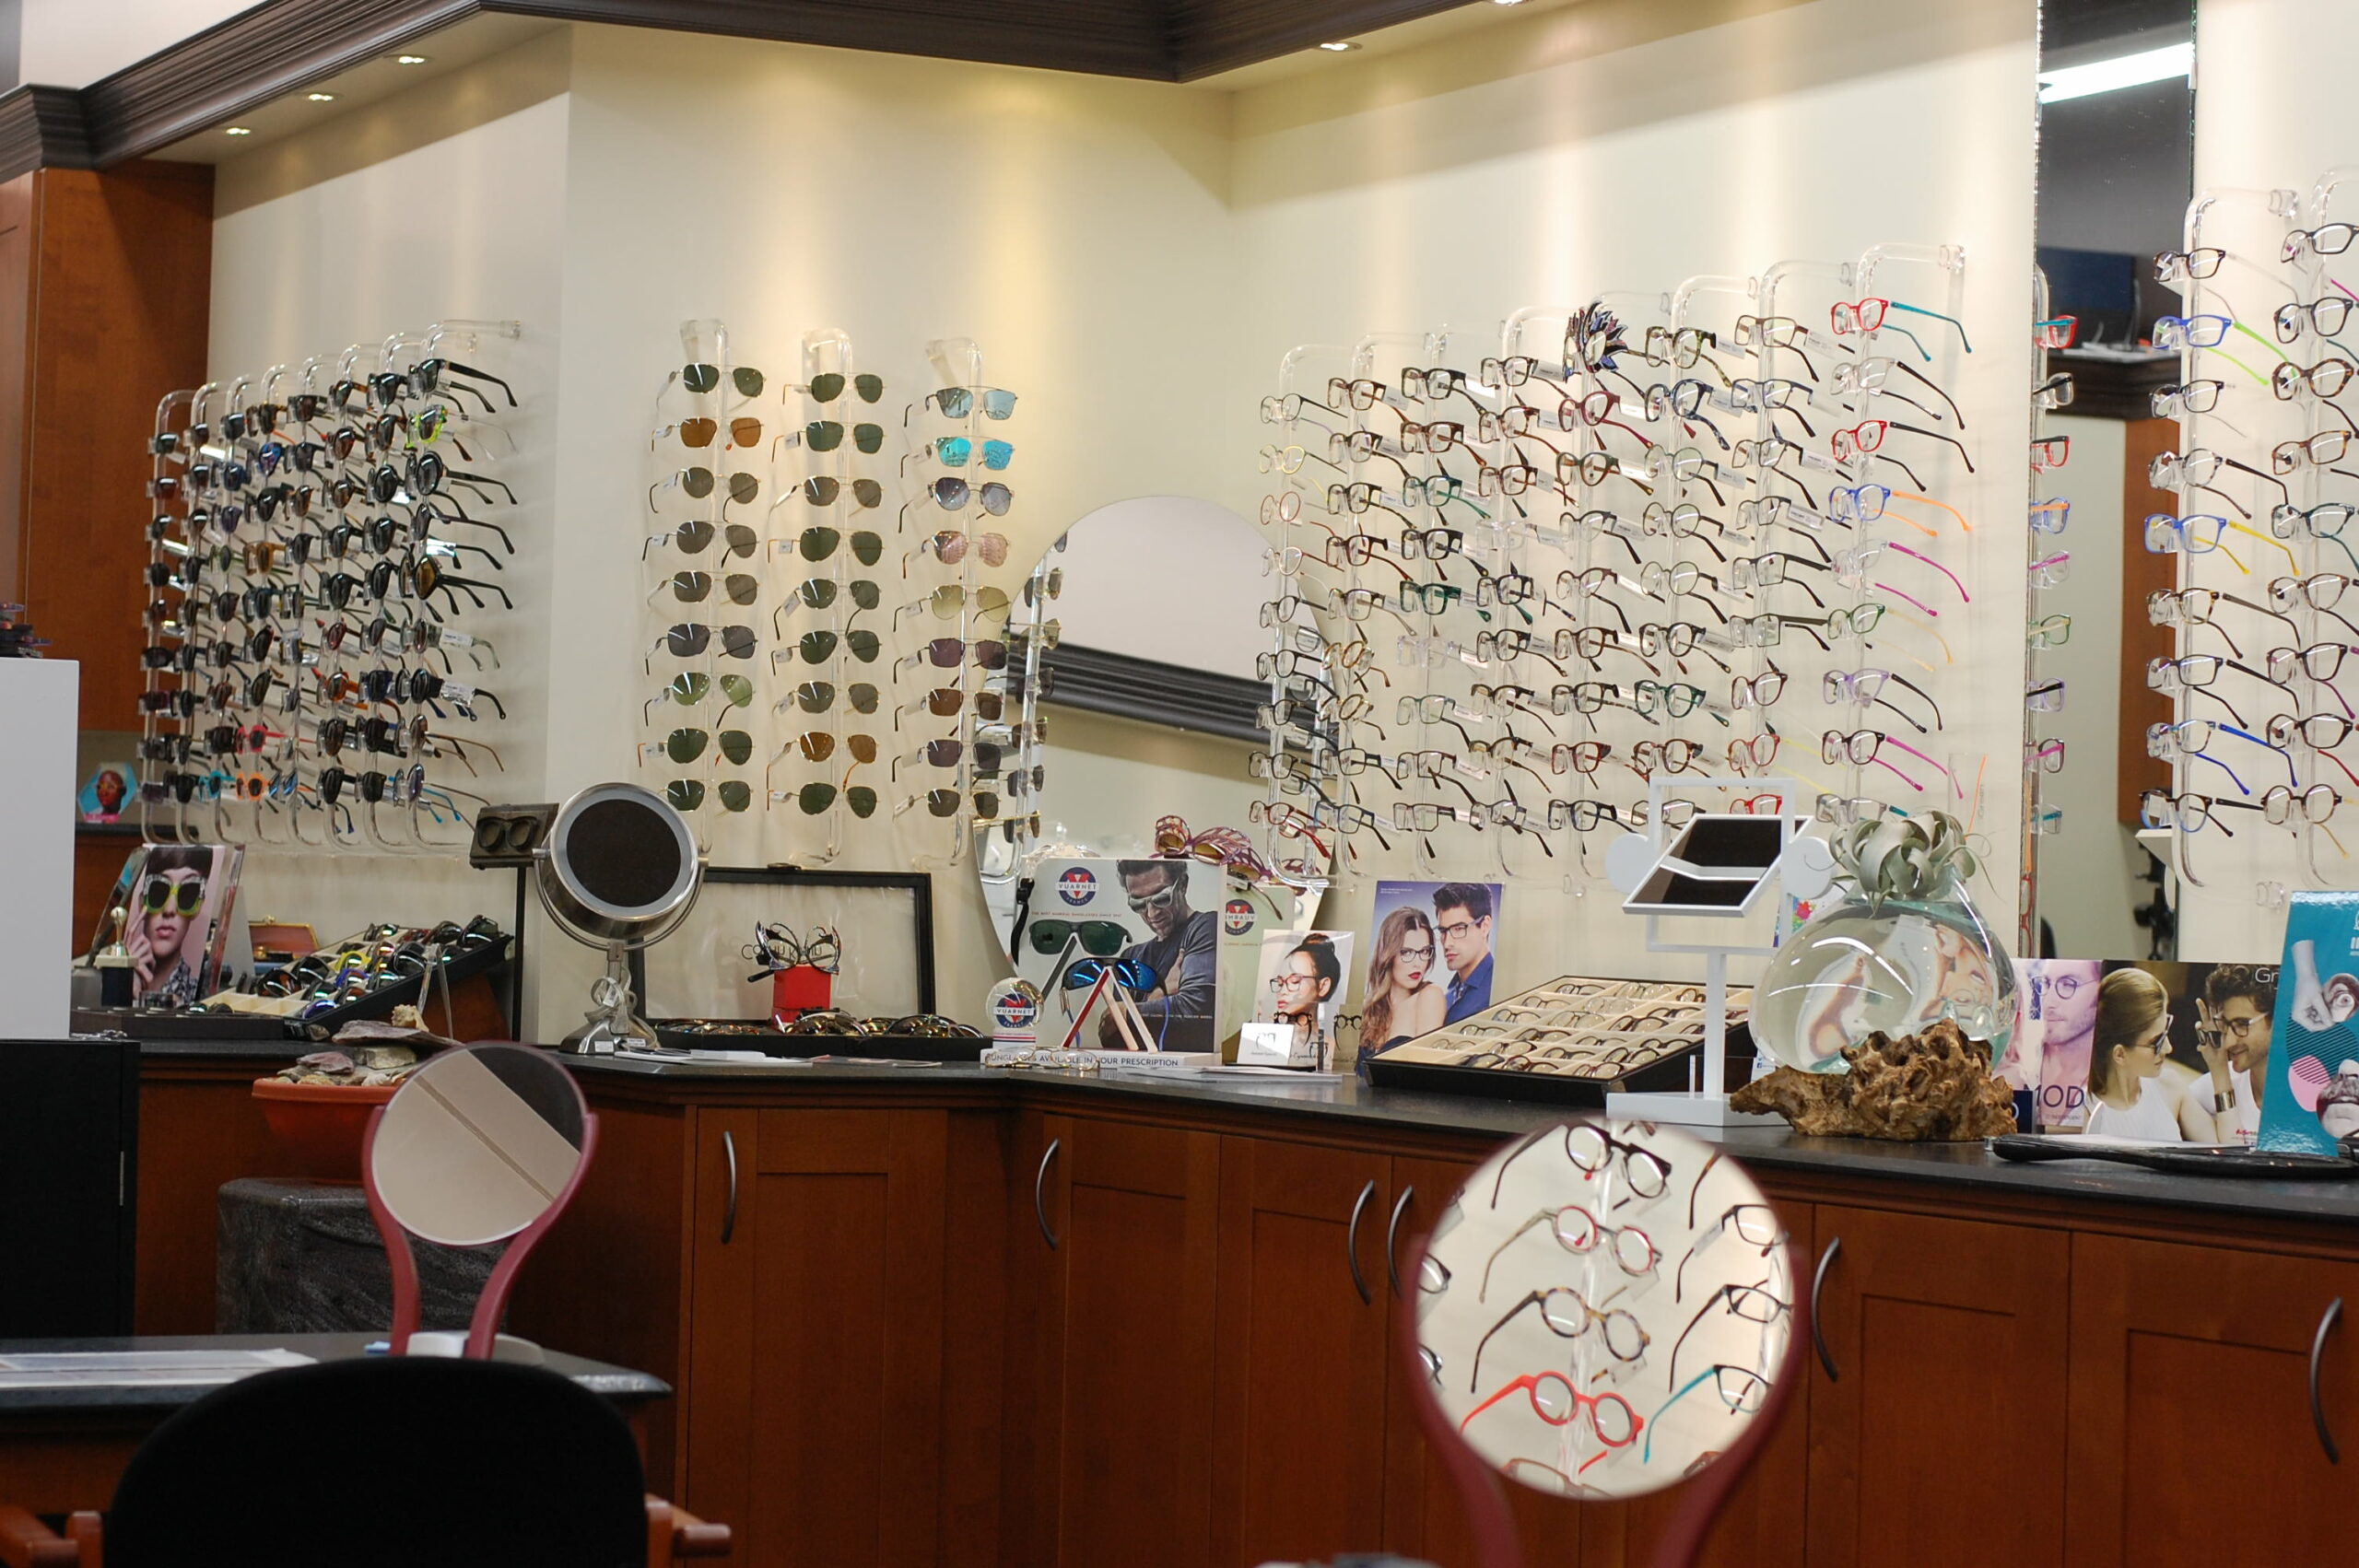 The Optical Excellence Store